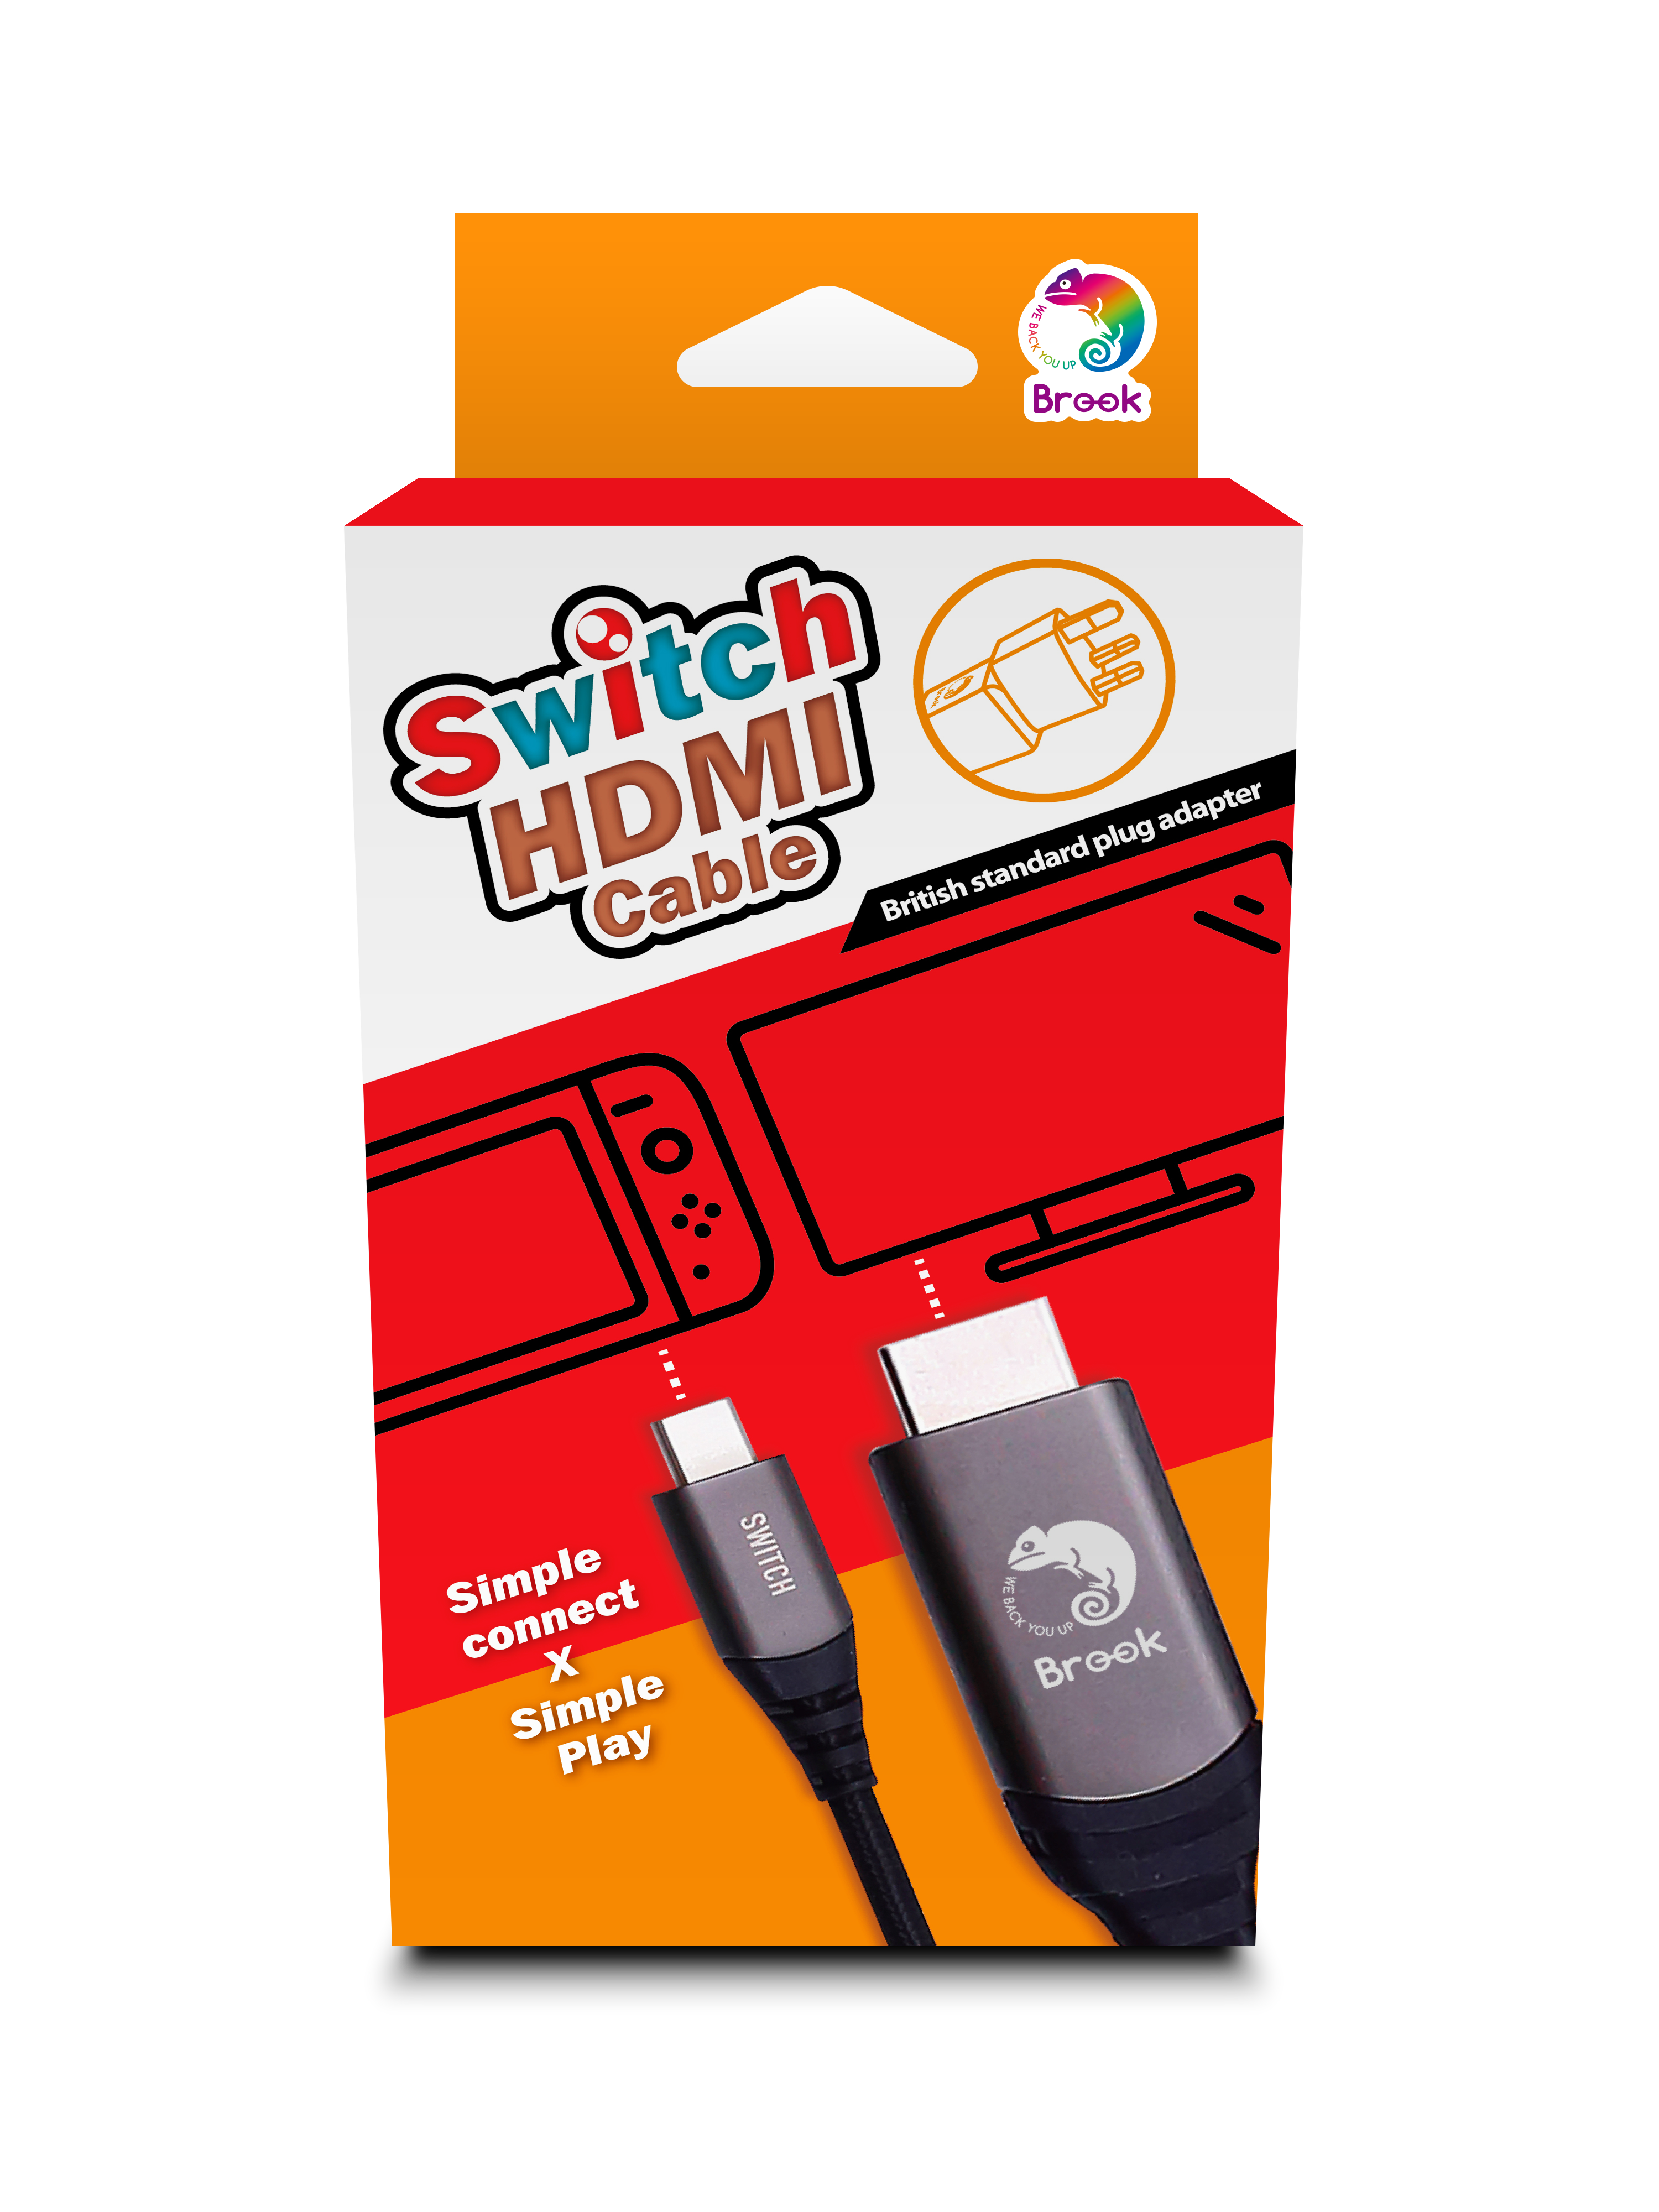 What HDMI Cable Comes With Nintendo Switch